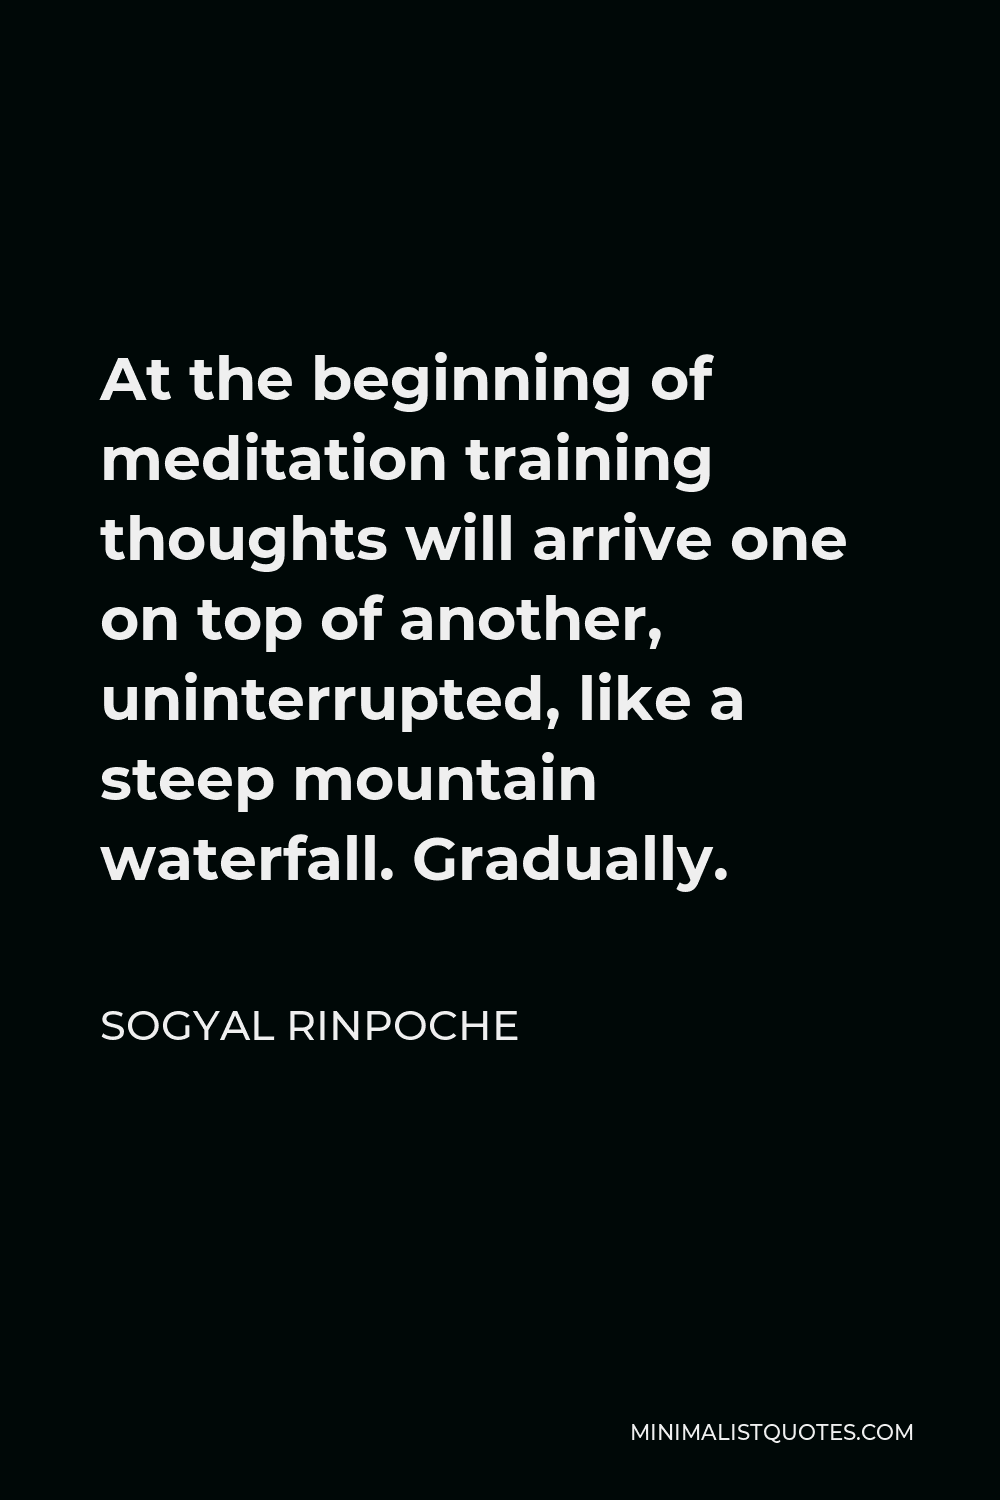 Sogyal Rinpoche Quote - At the beginning of meditation training thoughts will arrive one on top of another, uninterrupted, like a steep mountain waterfall. Gradually.